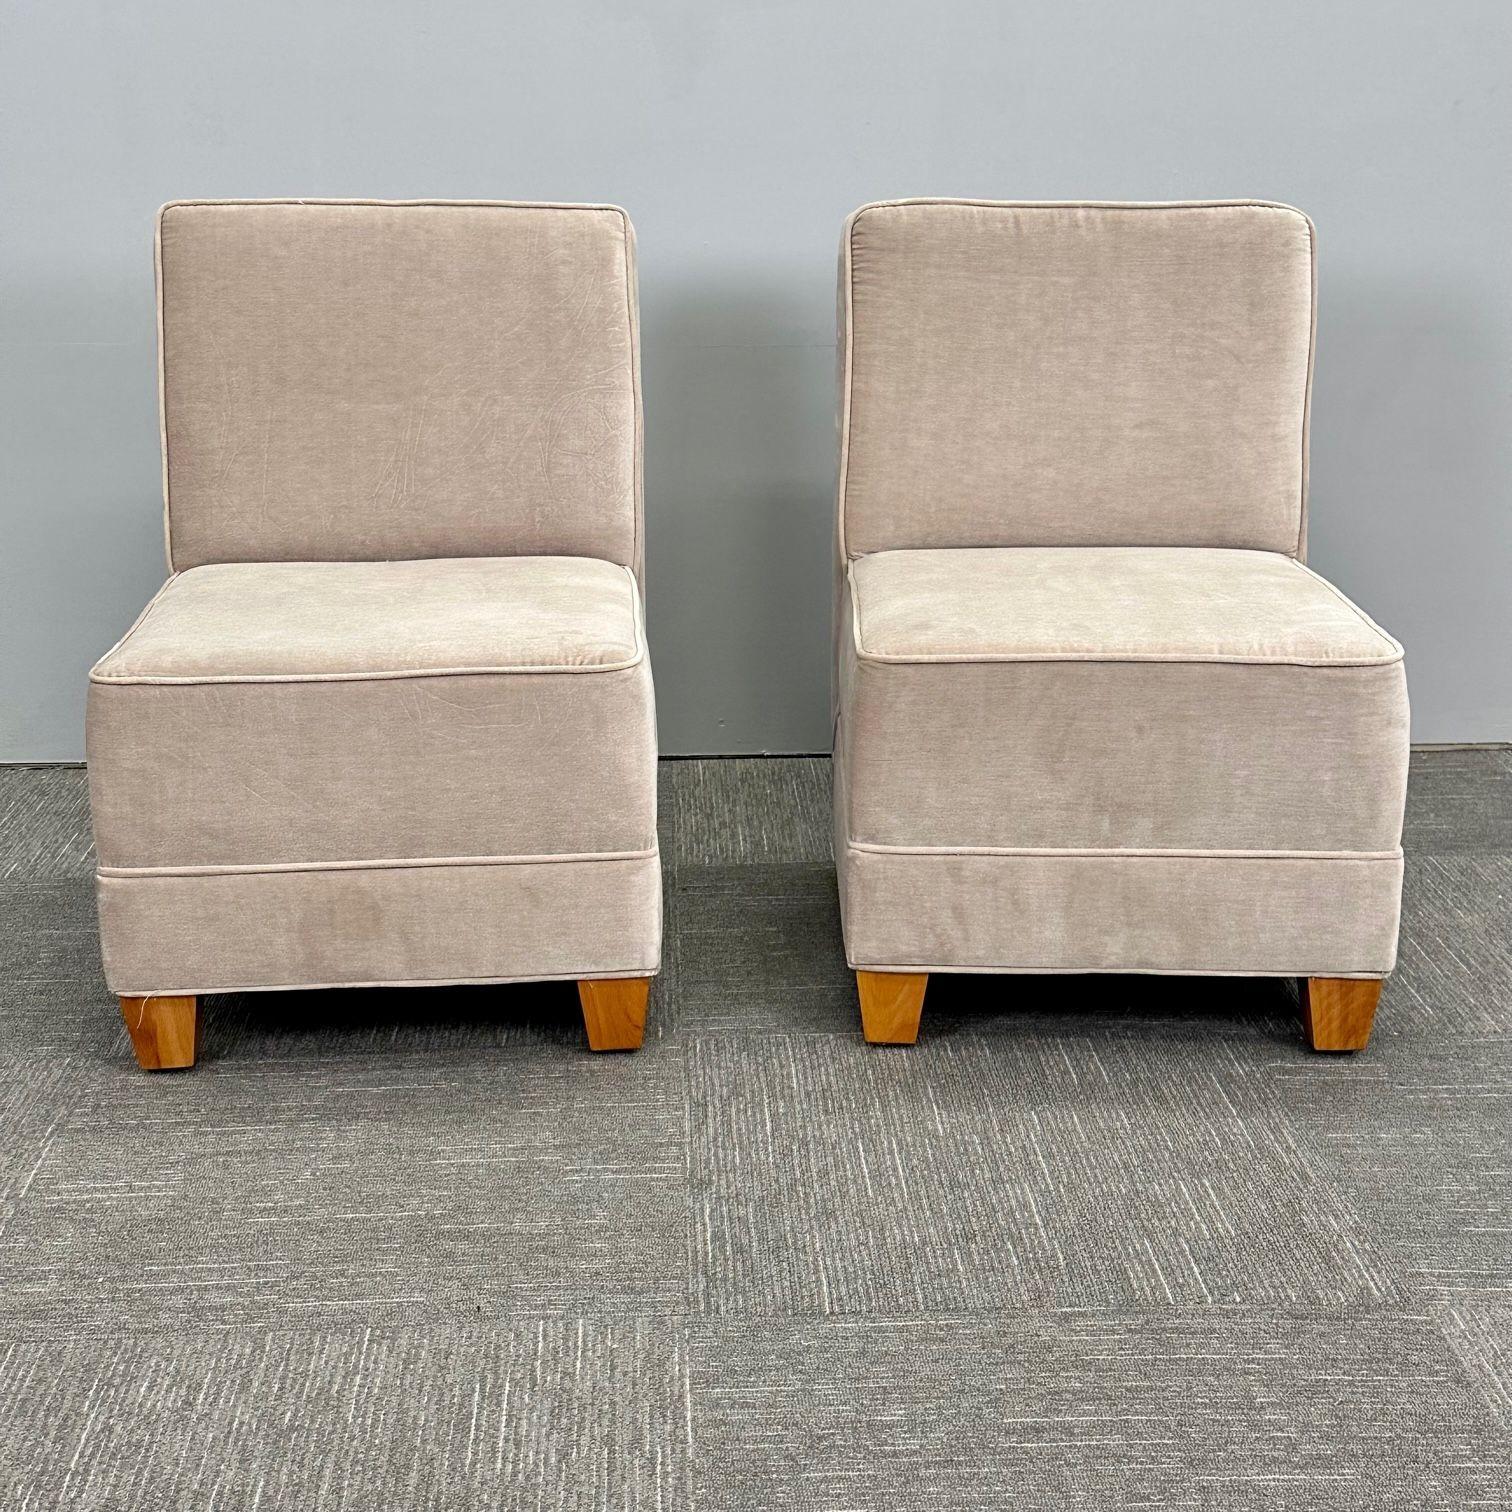 Pair Mid-Century Modern Jean-Michel Frank Style Lounge / Slipper Chairs, Mohair For Sale 1